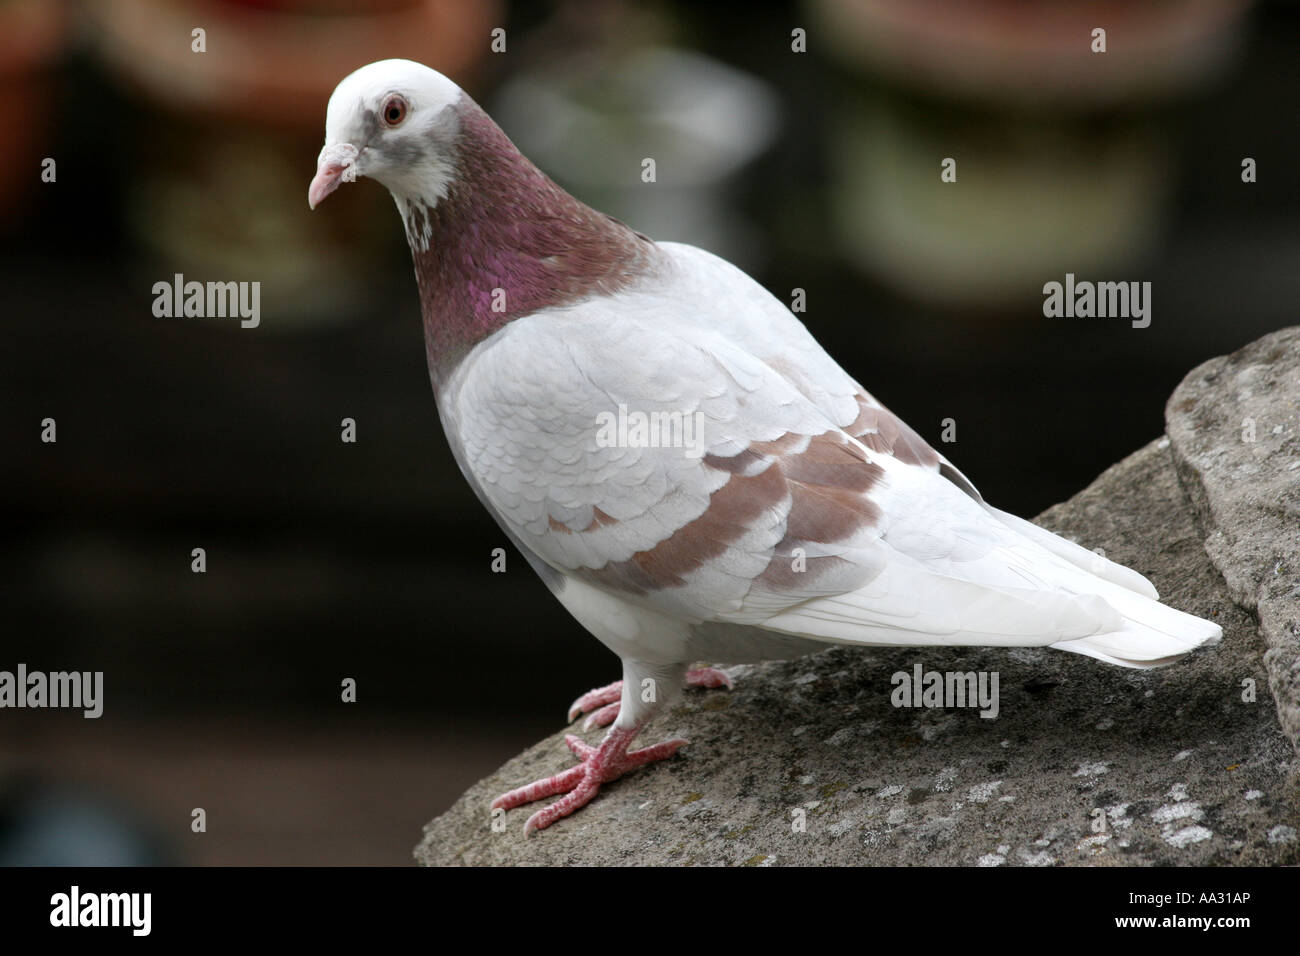 A pigeon or dove with unusual colourings pictured in Southern England. Stock Photo